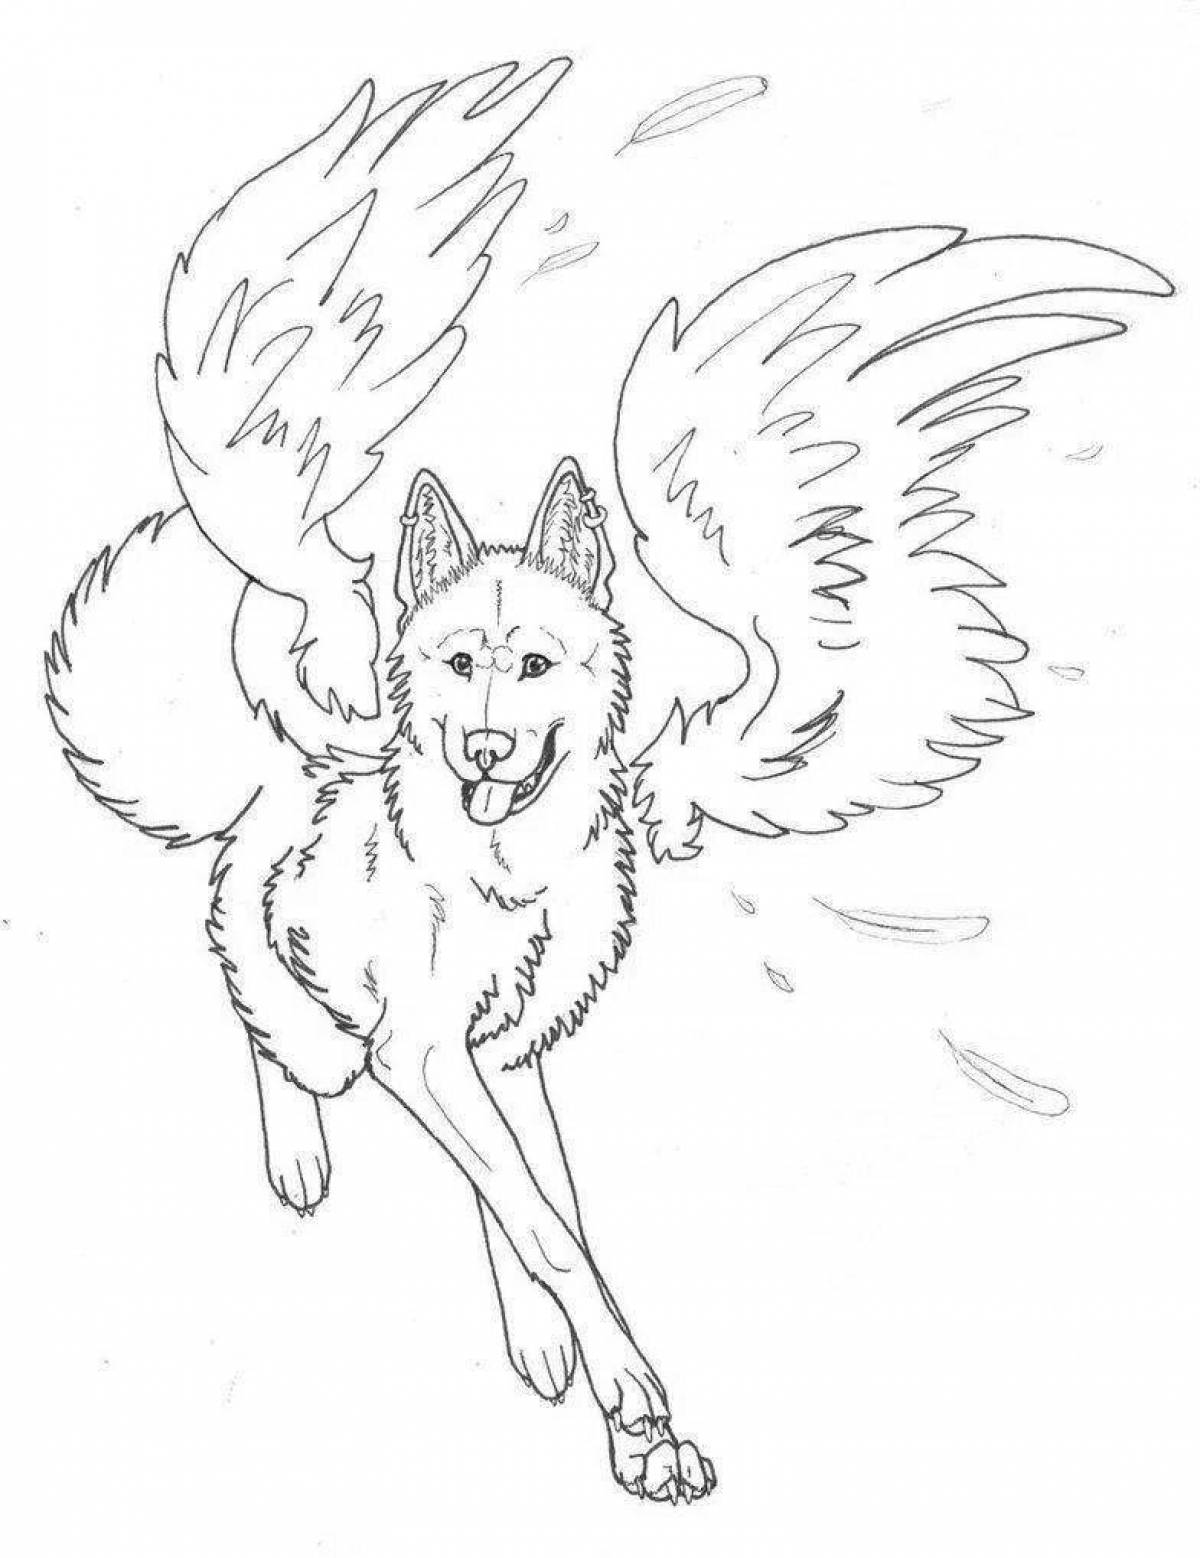 Dog with wings #2